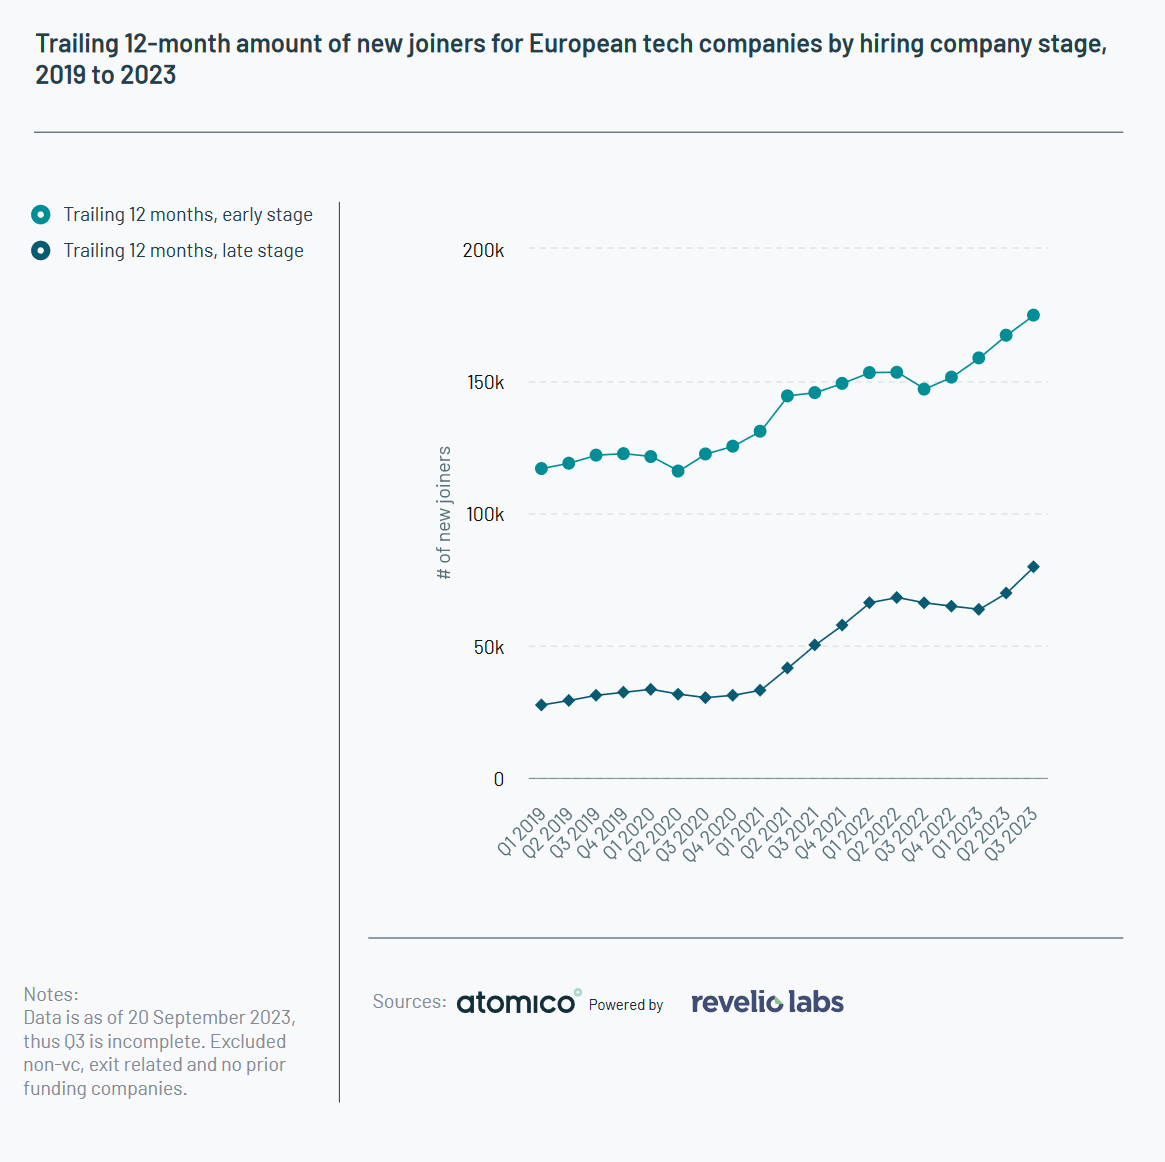 Trailing 12-month amount of new joiners for European tech companies by company stage, 2018 to 2023